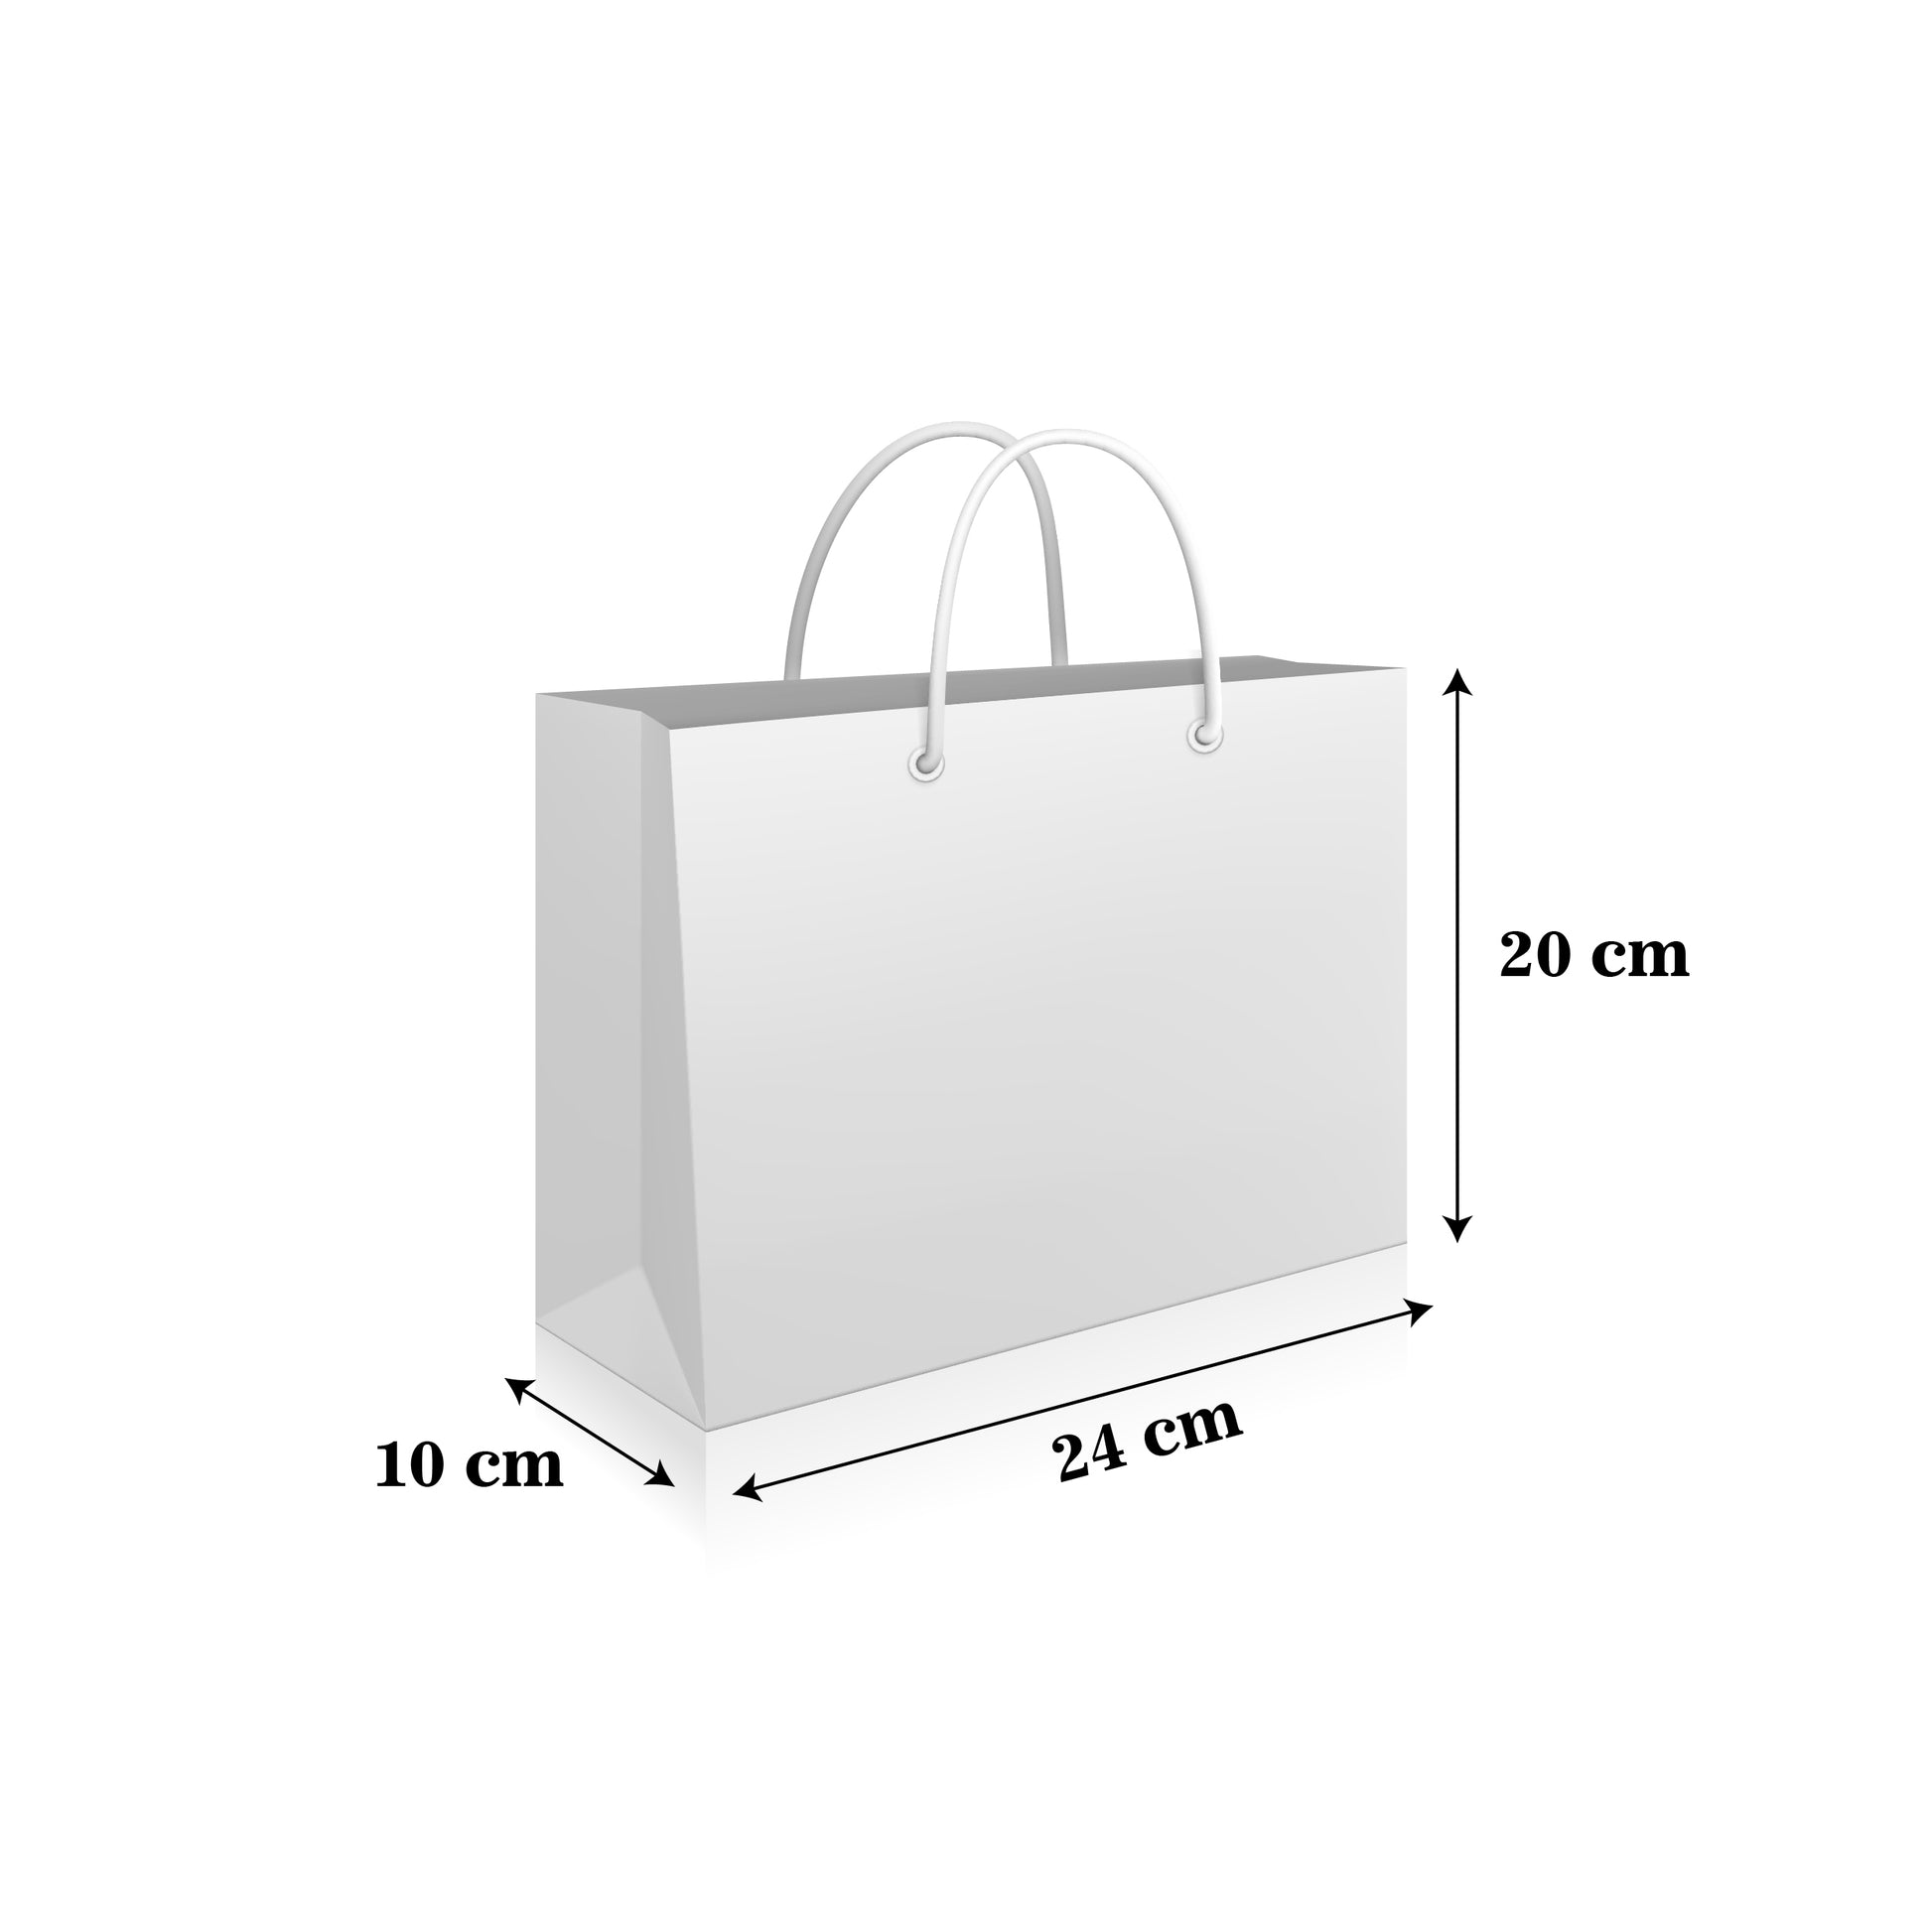 BUY CRAFT PAPER BAG IN QATAR | HOME DELIVERY ON ALL ORDERS ALL OVER QATAR FROM BRANDSCAPE.SHOP